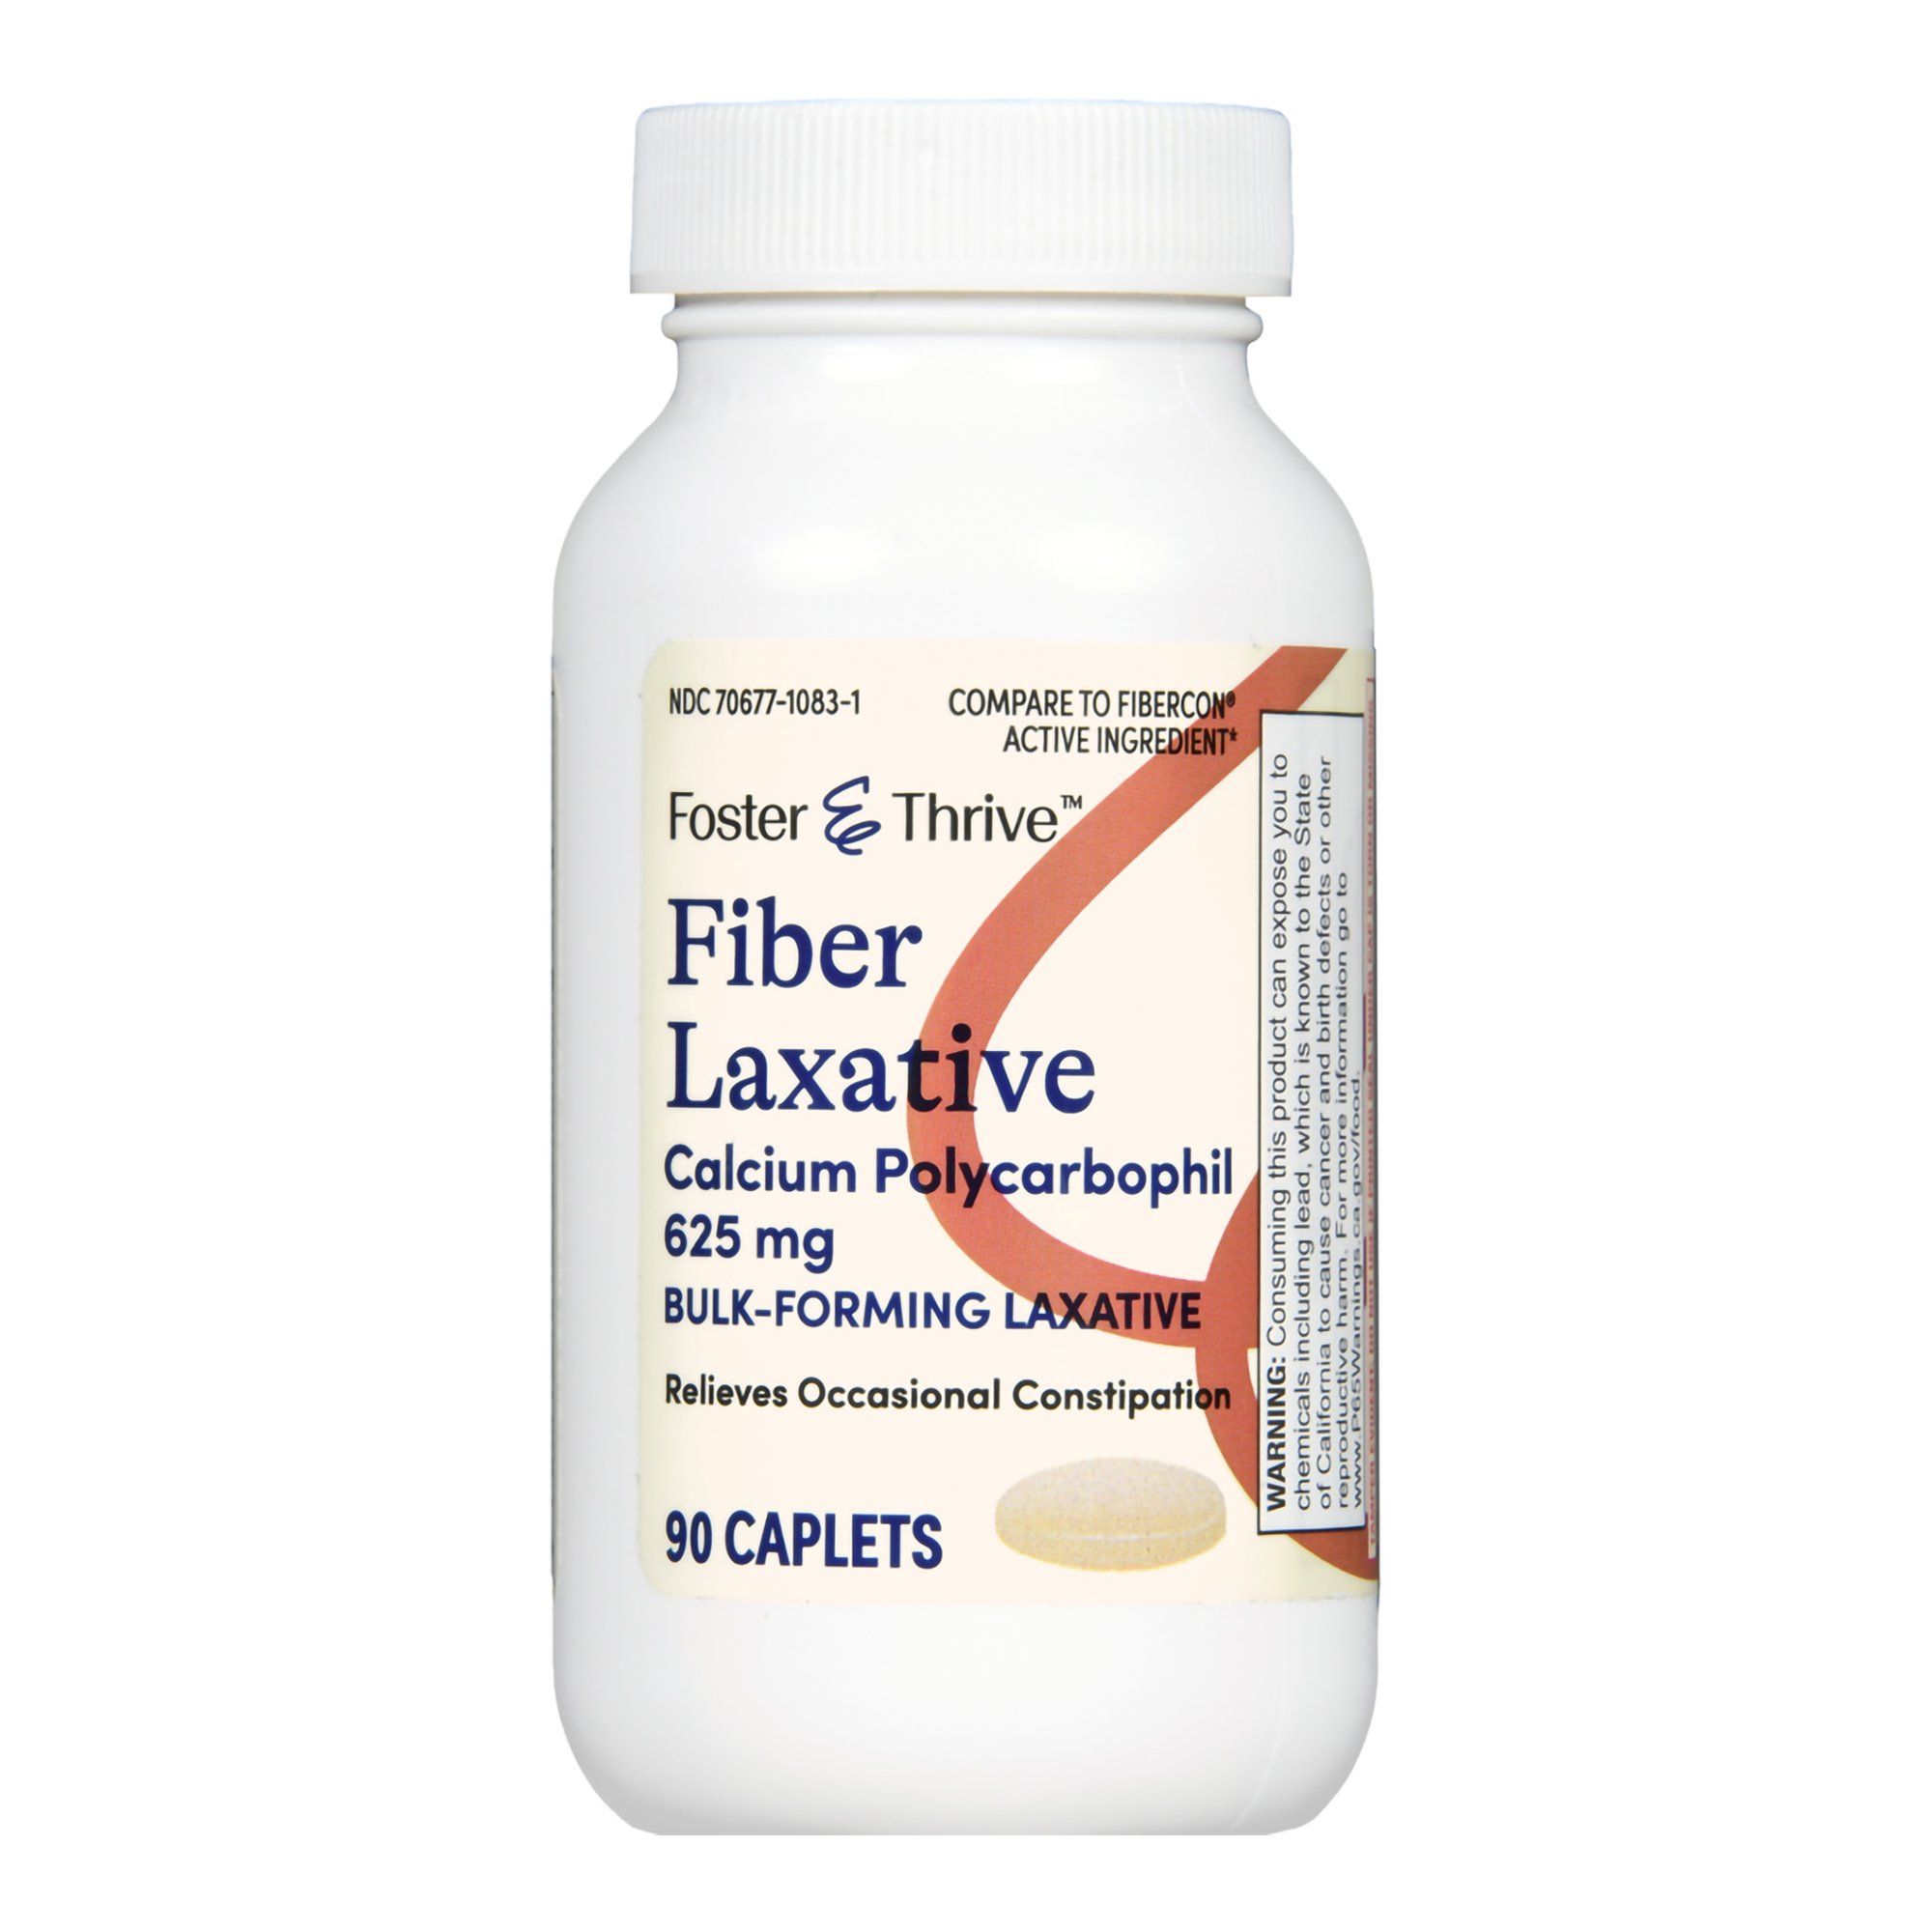 Foster & Thrive Fiber Laxative Calcium Polycarbophil Caplets, 625 mg  - 90 ct